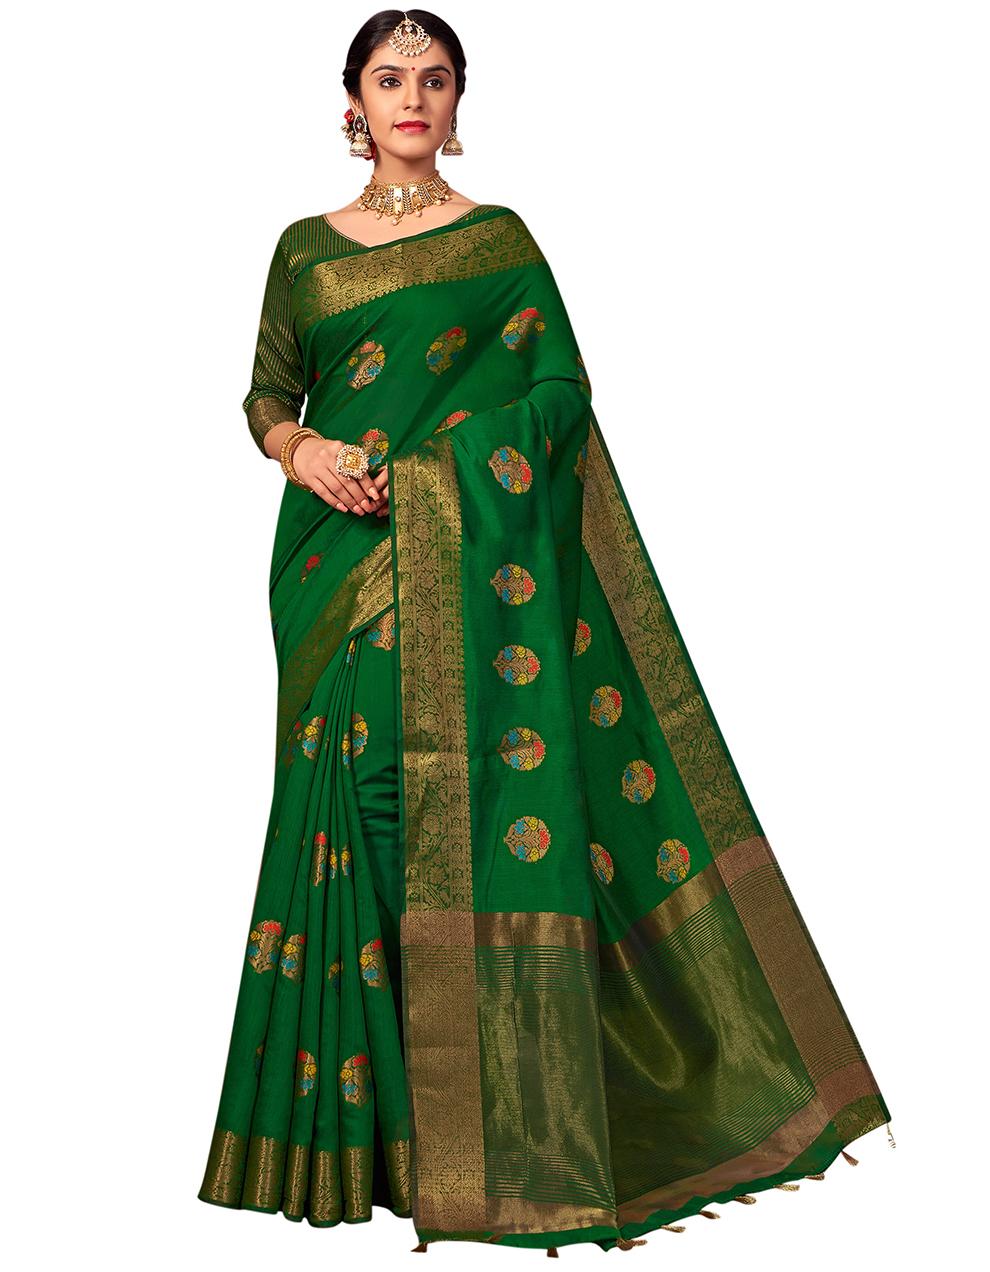 Parrot green Chanderi Cotton Saree With Blouse MK25602